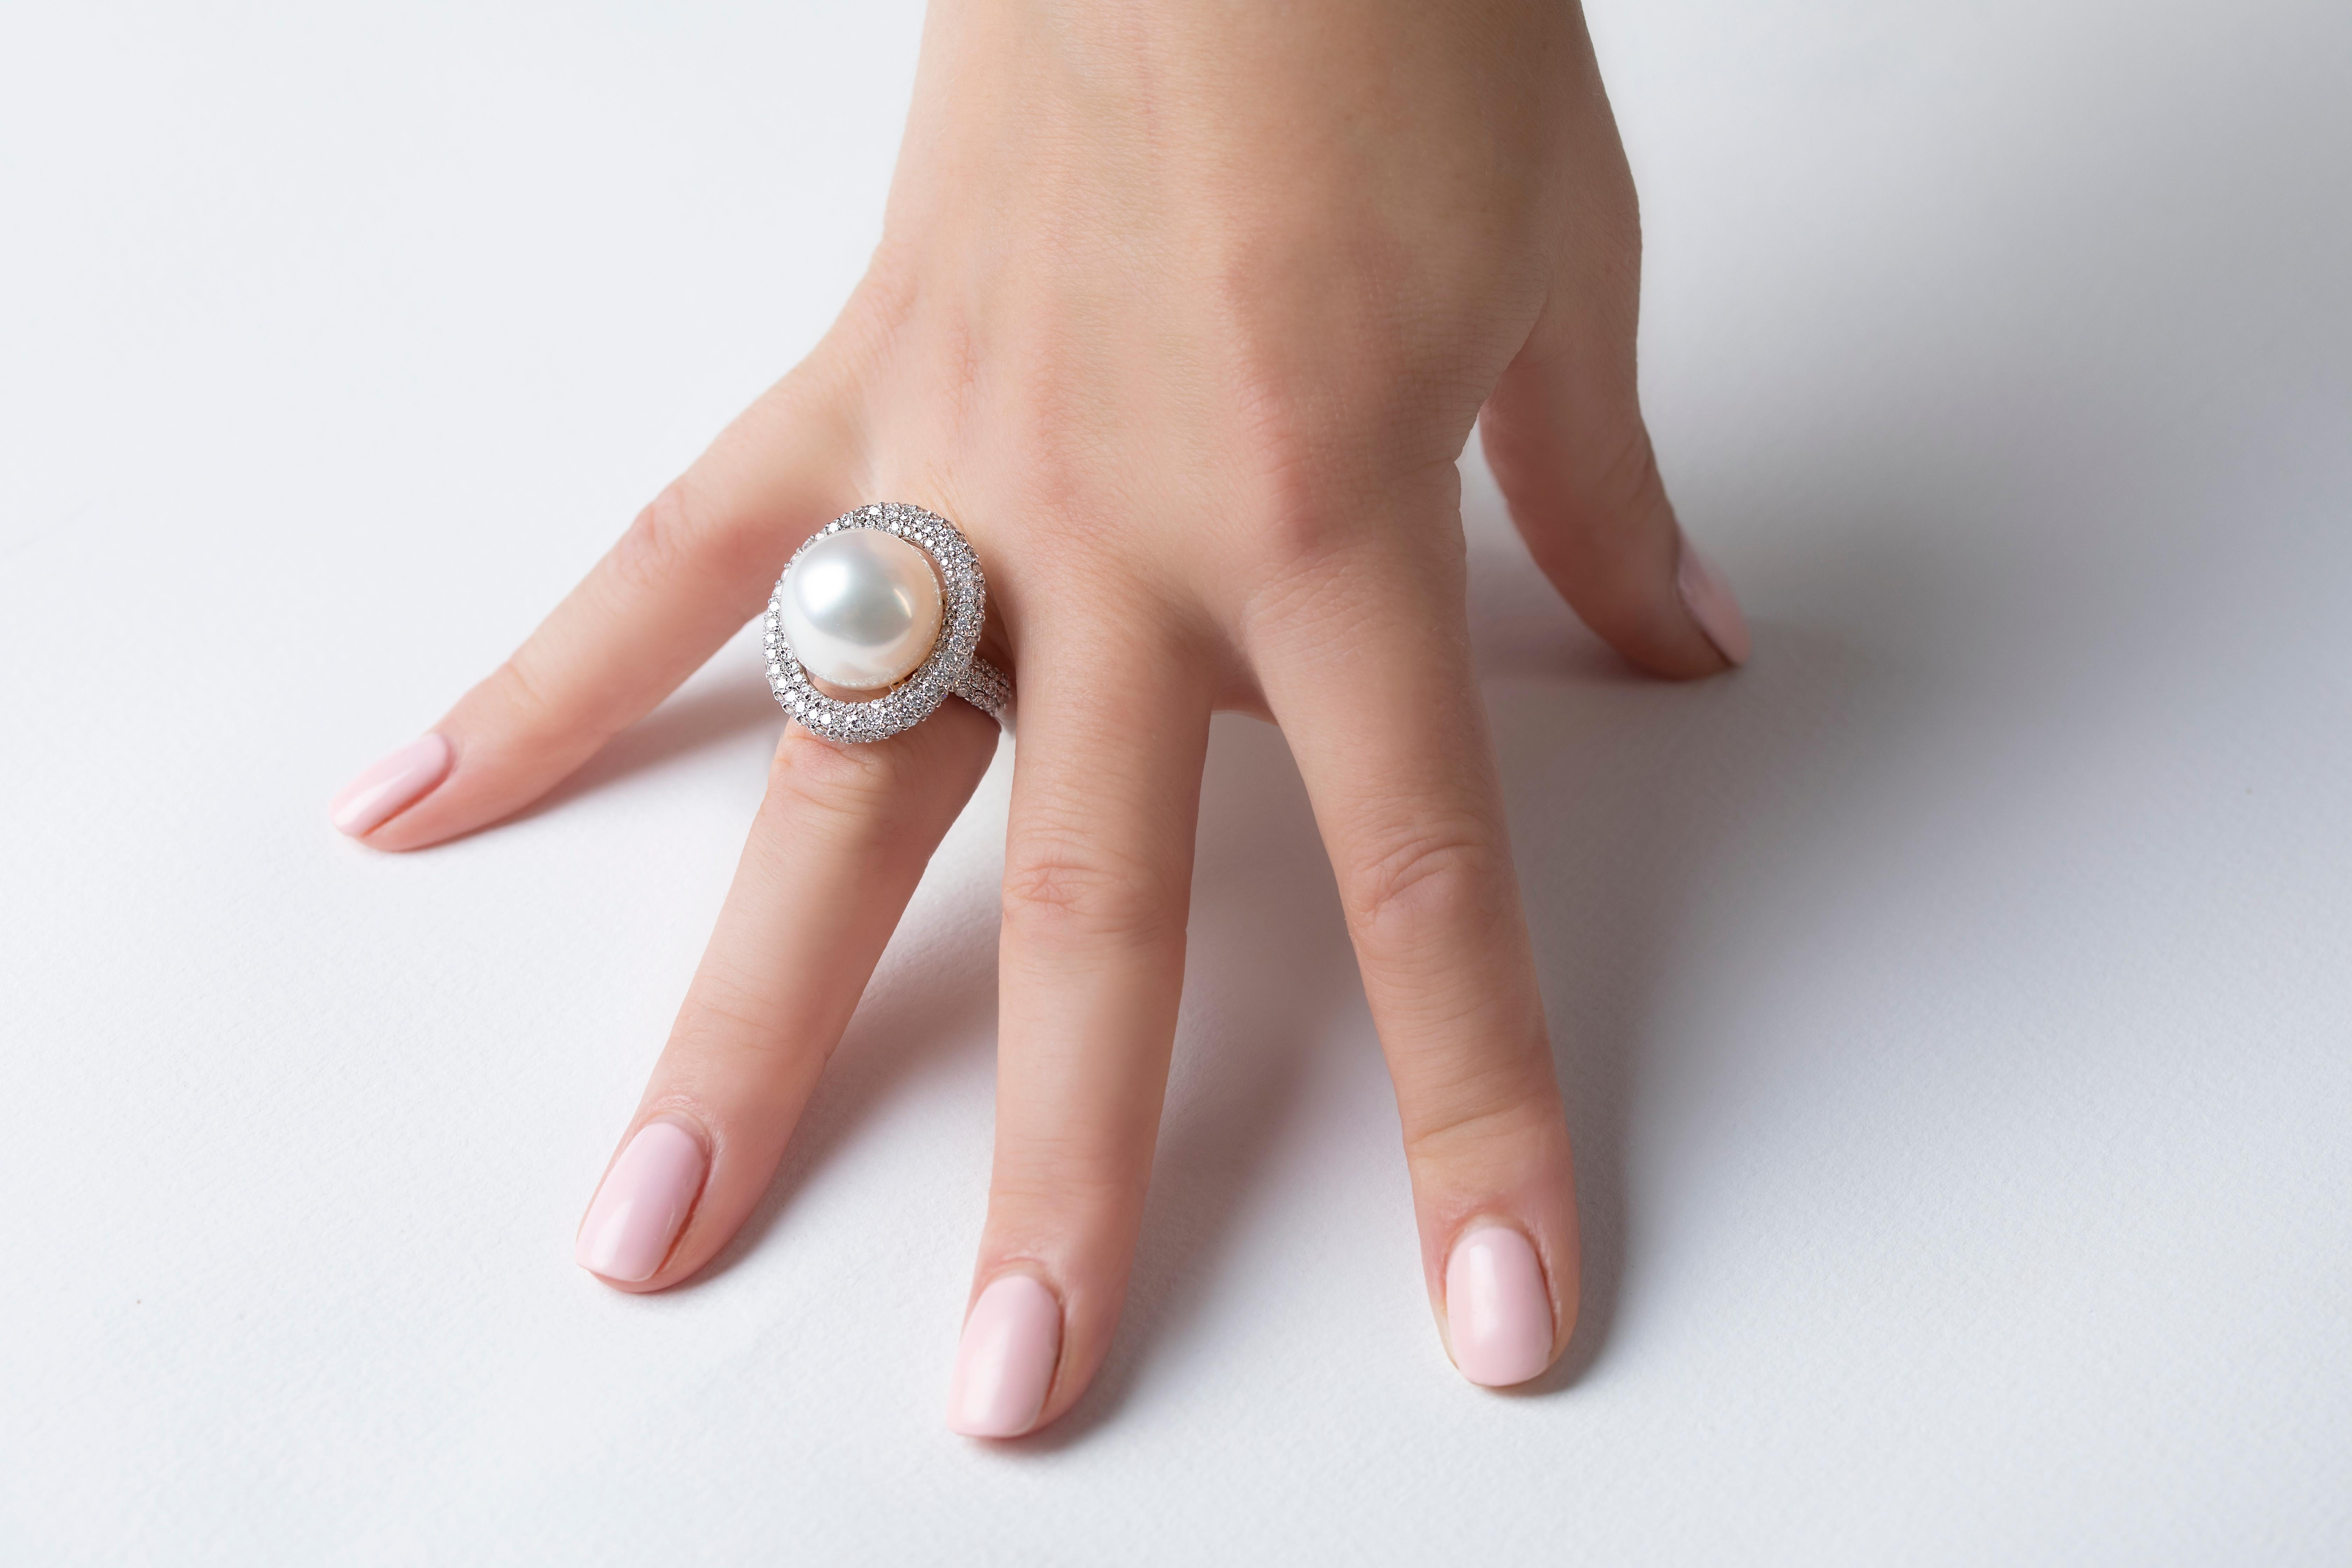 The Mayfair collection by Yoko London features showstopping pieces, as exclusive as the collection's namesake district. This cocktail ring by Yoko London features a luscious South Sea pearl, accentuated by a halo of pavé set diamonds. Combine with